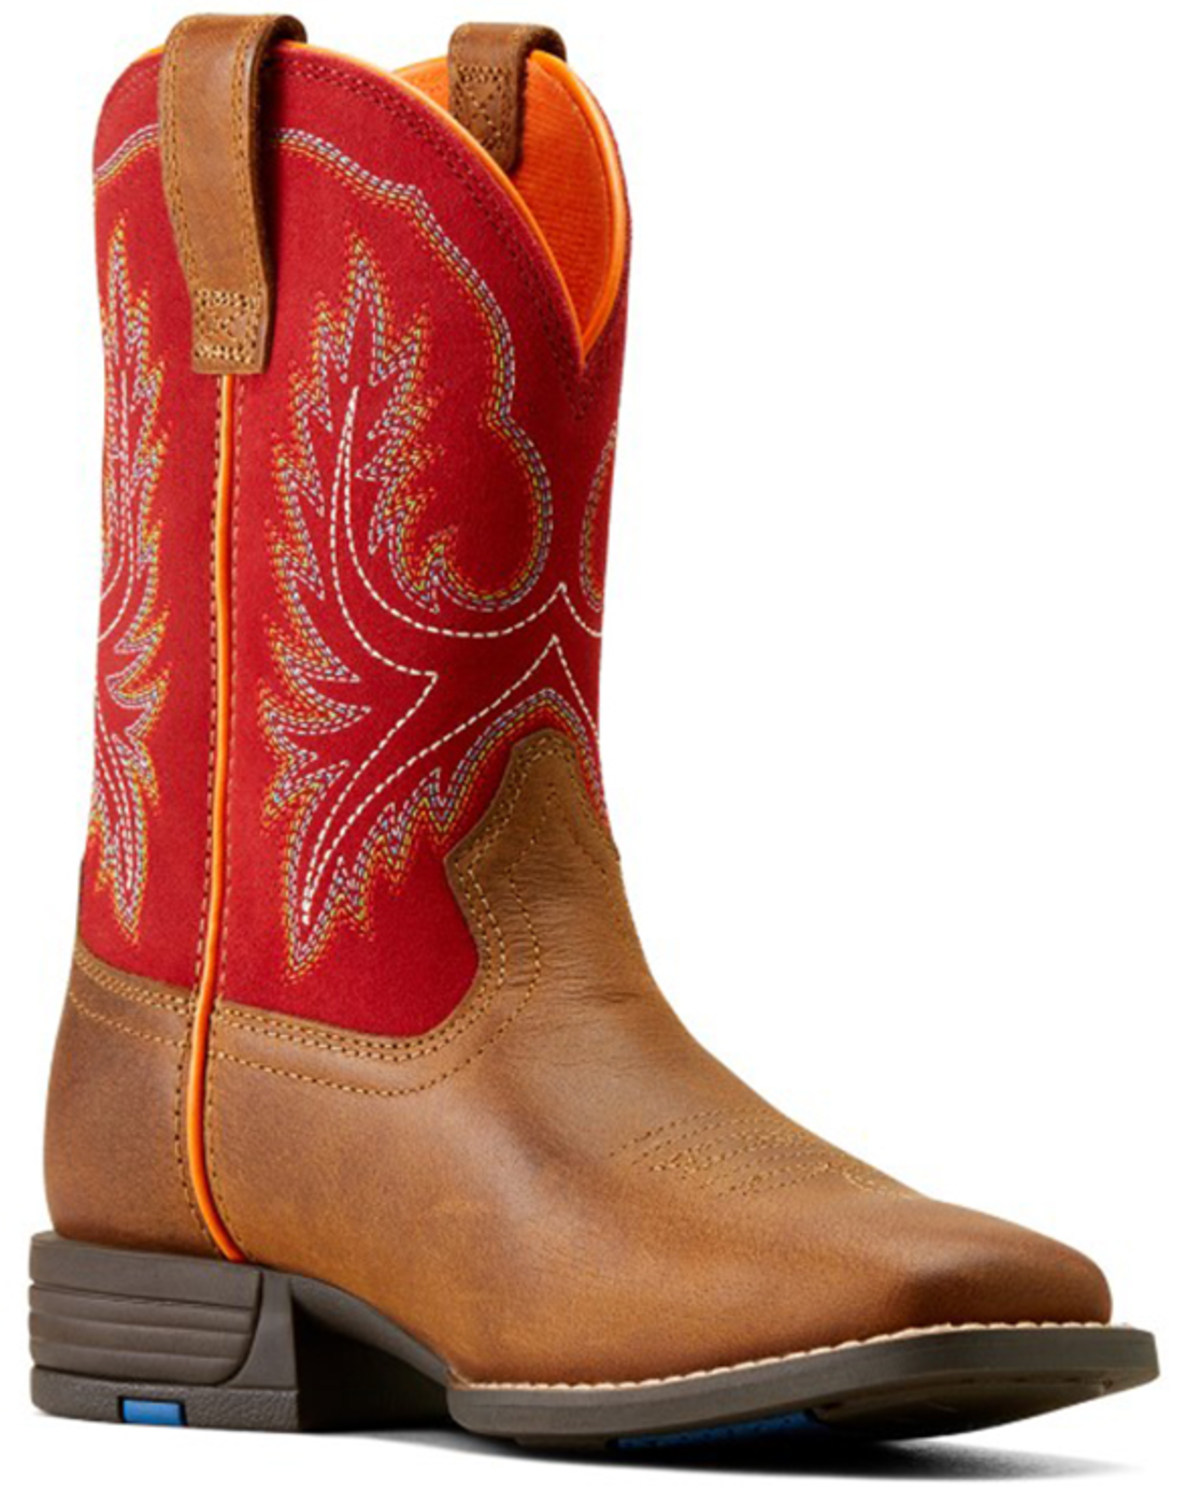 Ariat Boys' Wilder Western Boots - Broad Square Toe